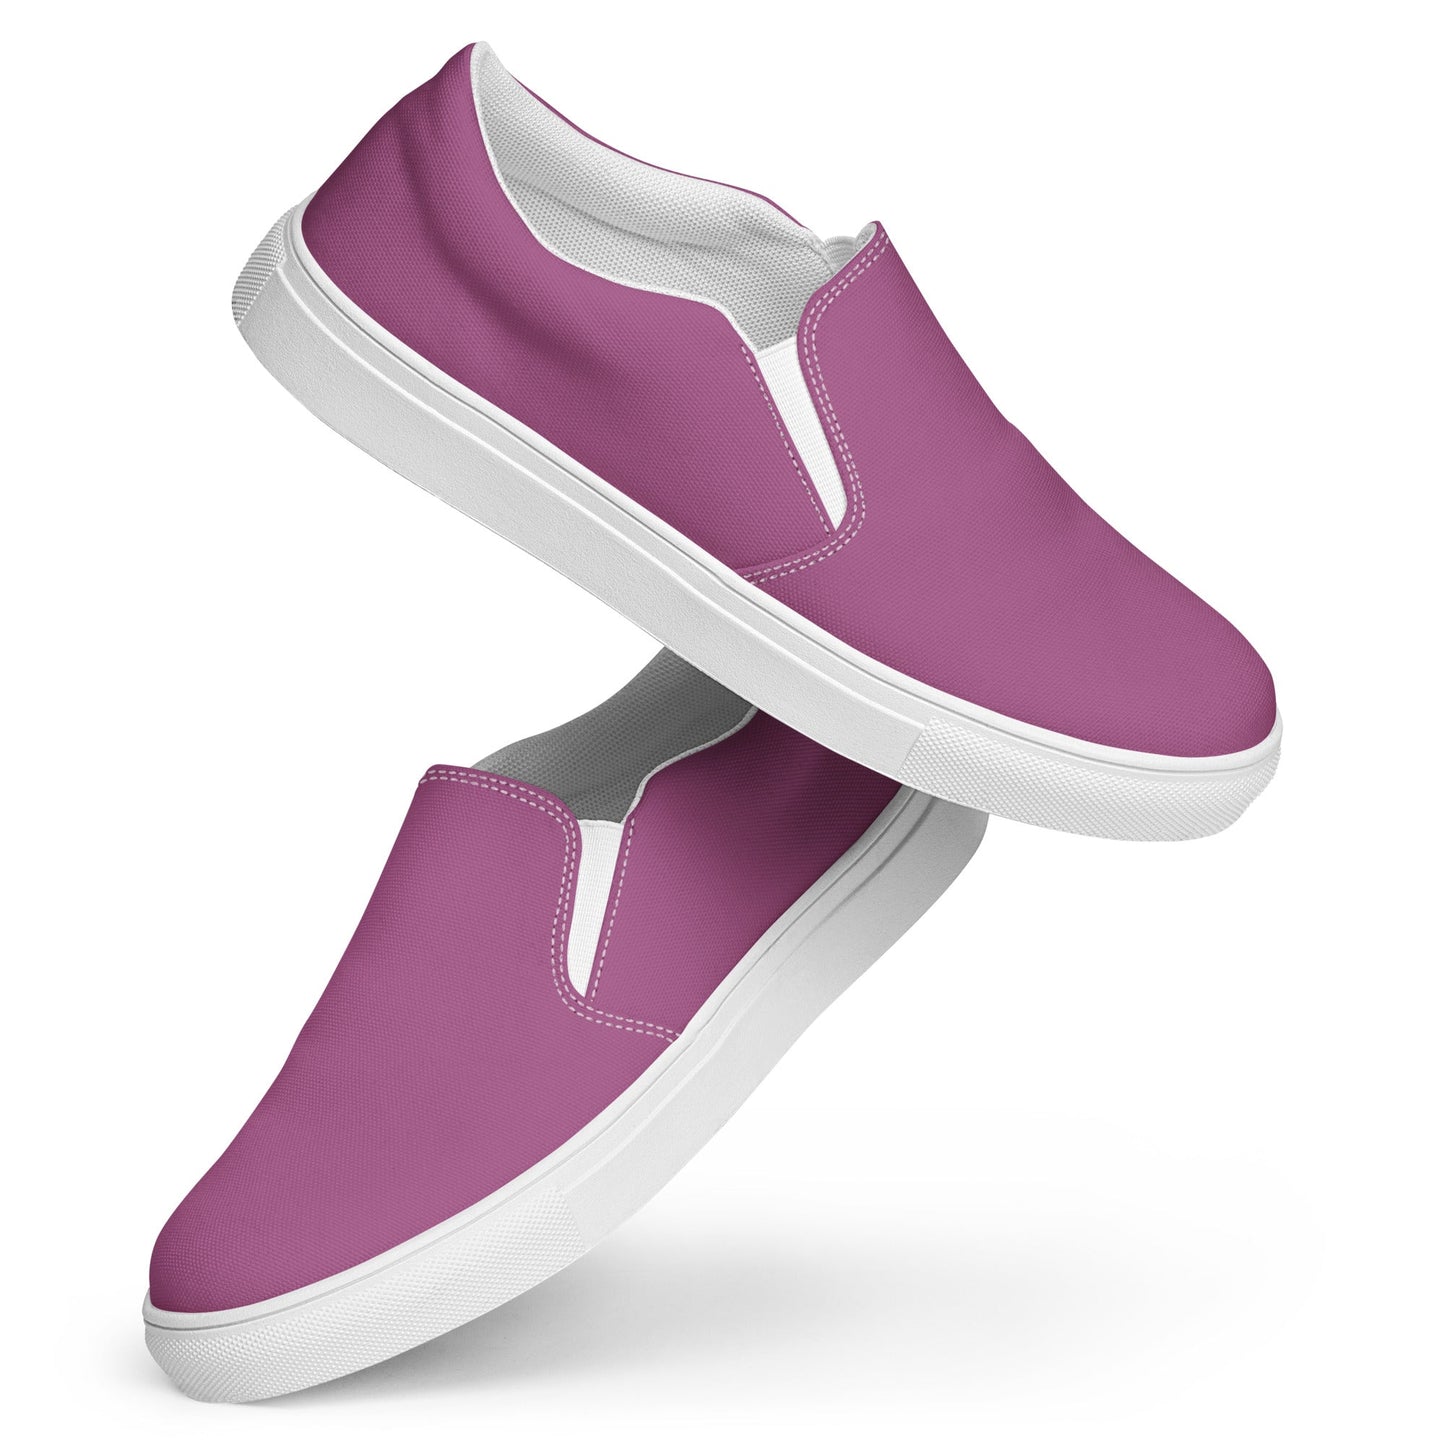 klasneakers Men’s slip-on canvas shoes - Candy Wrapper Pink